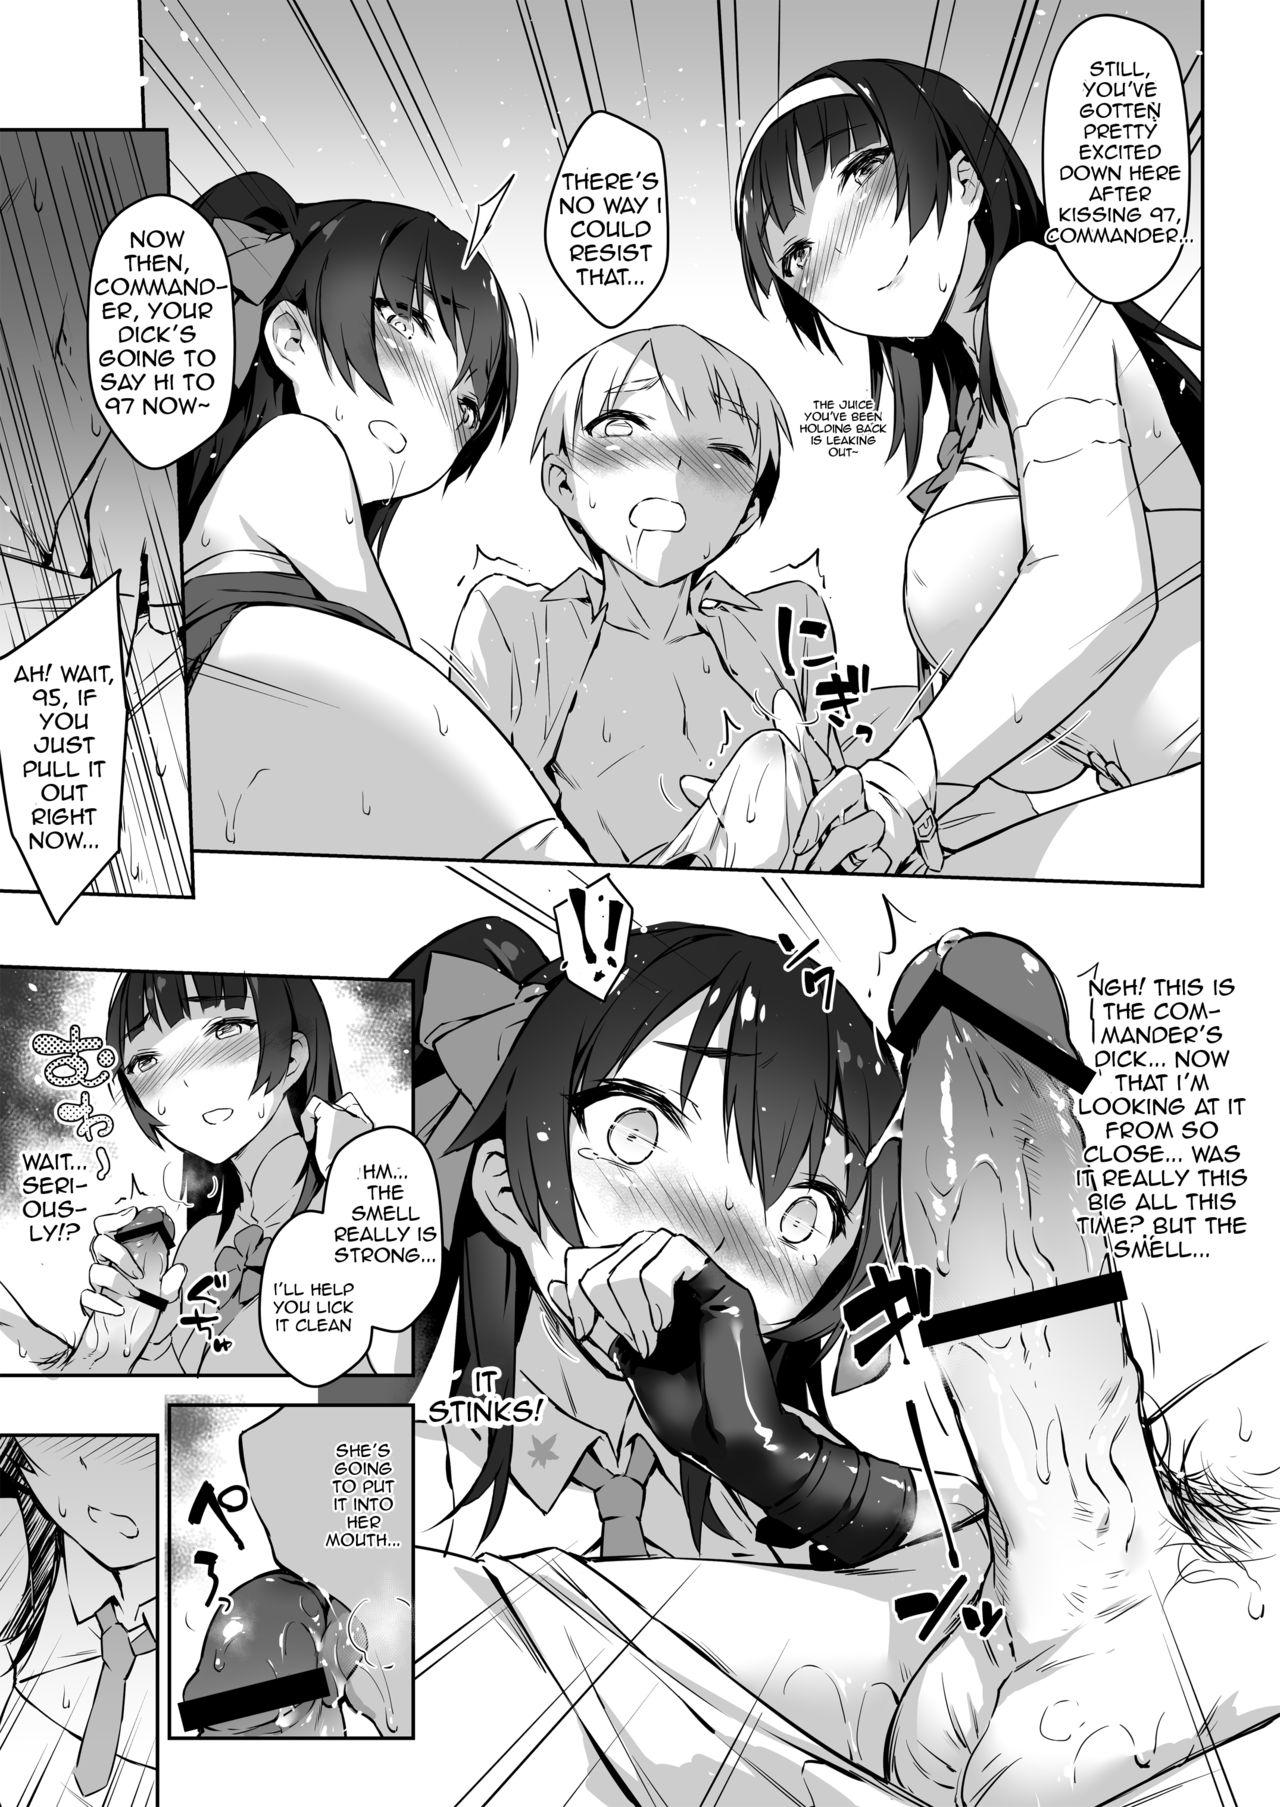 Bus Type 95 Type 97, Let Your Big Sister Teach You! - Girls frontline Gay Reality - Page 11